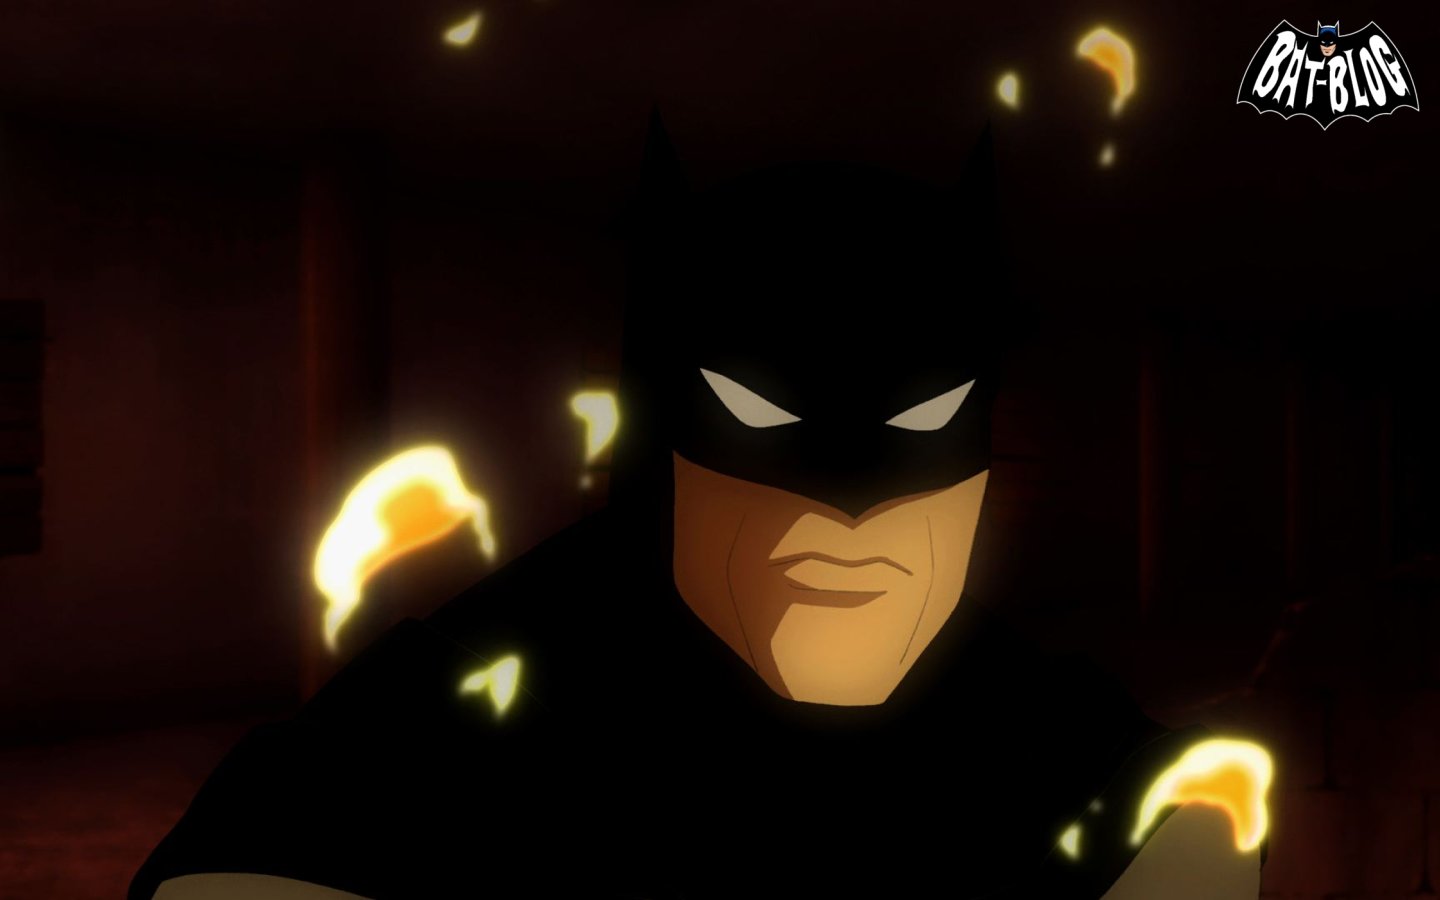 BATMAN YEAR ONE - New Movie Trailer Video & Wallpaper Backgrounds